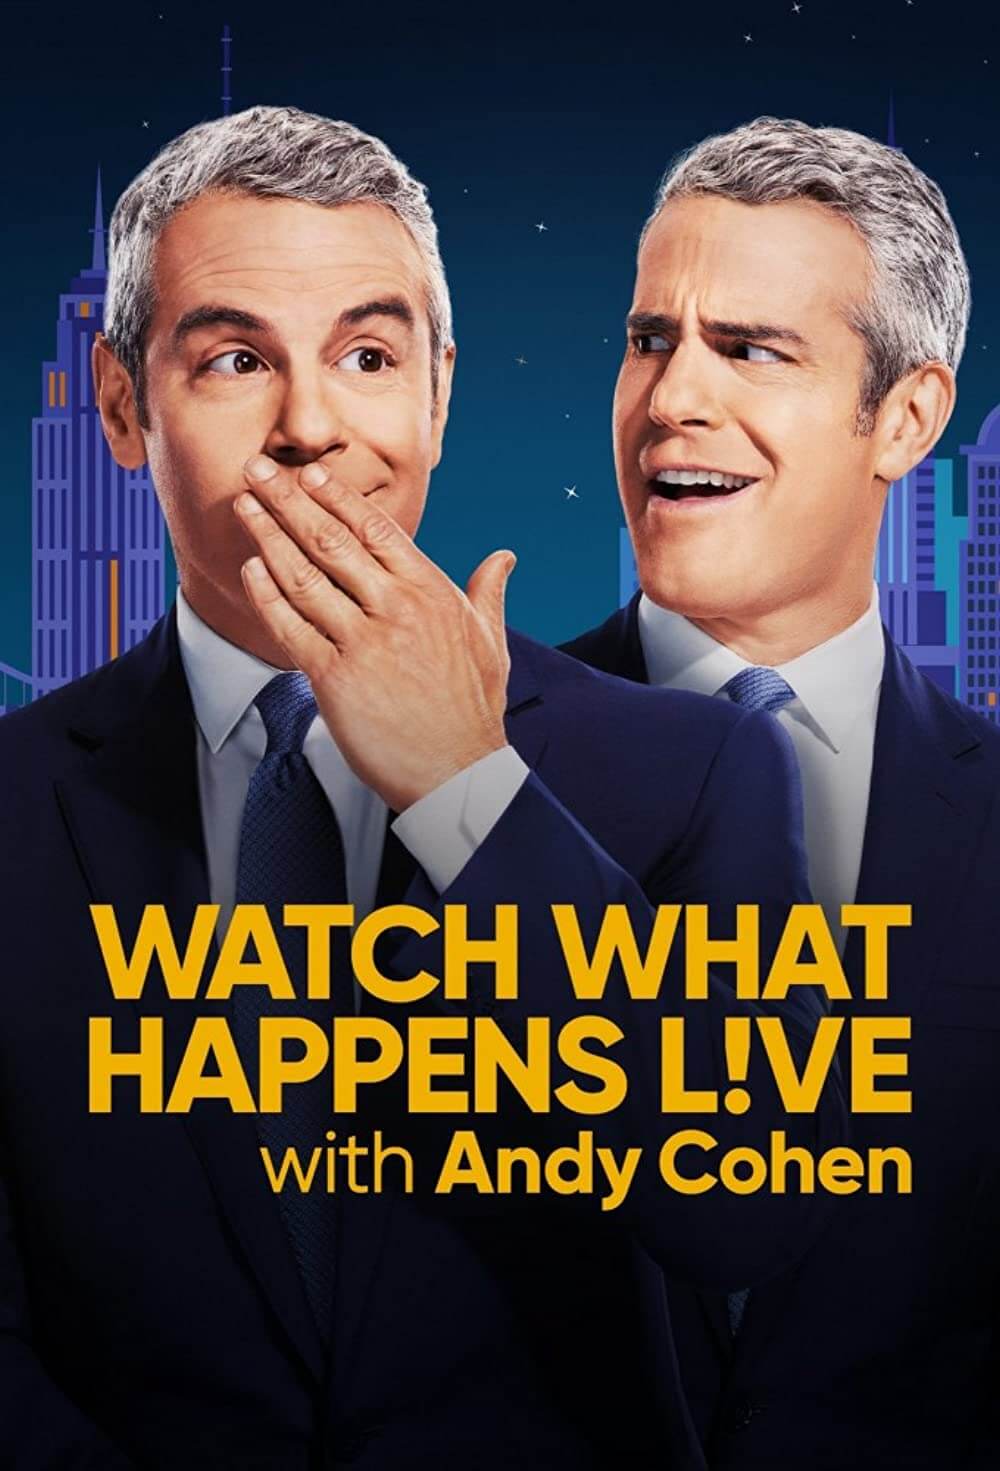 Watch-What-Happens-Live-With-Andy-Cohen-Since-2009-bravo-tv-best-shows